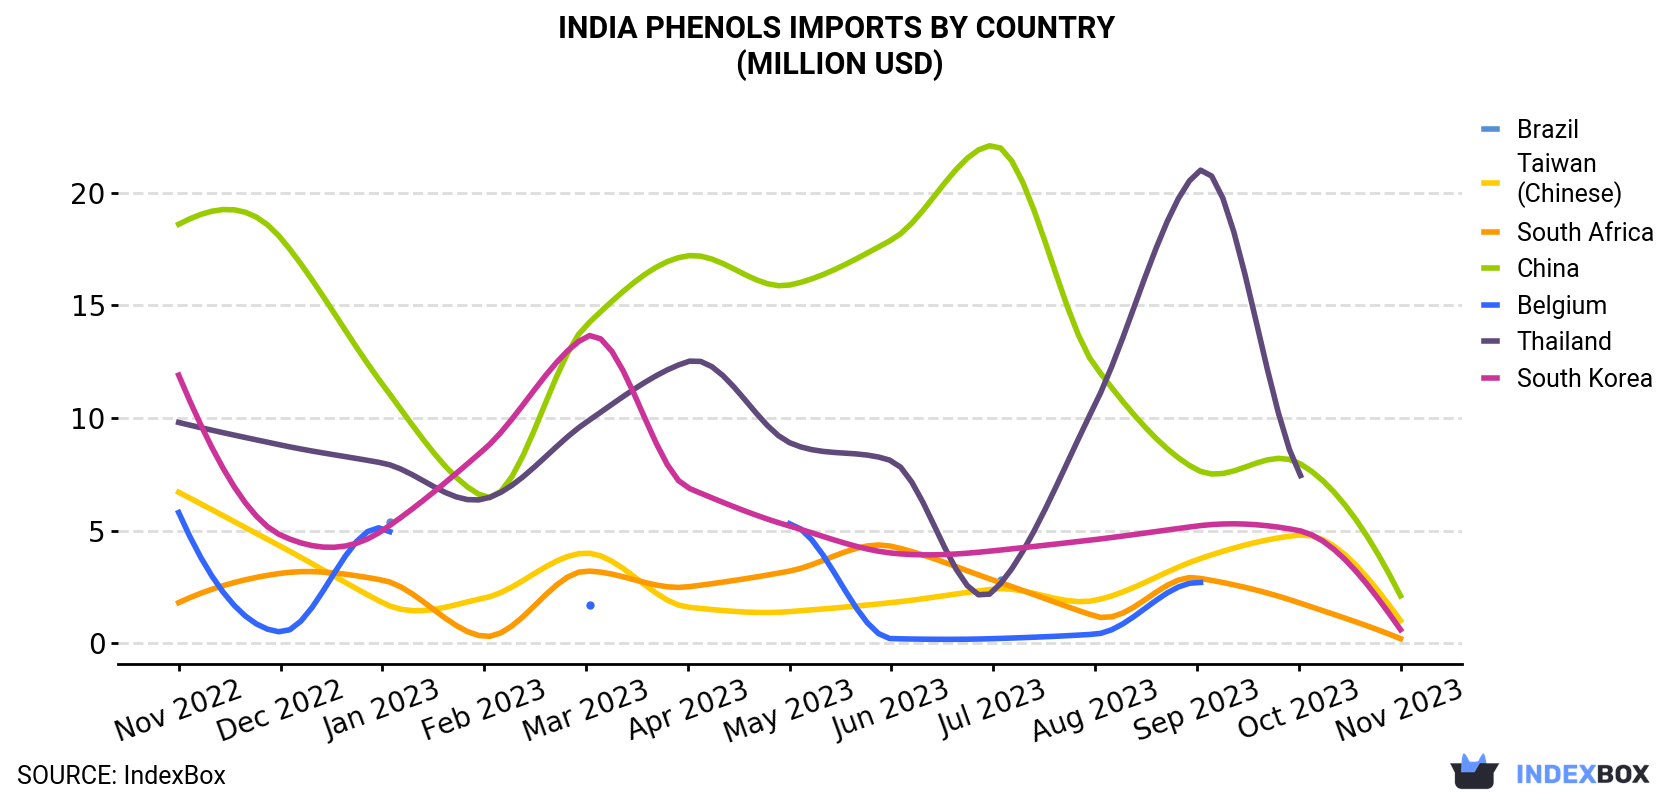 India Phenols Imports By Country (Million USD)